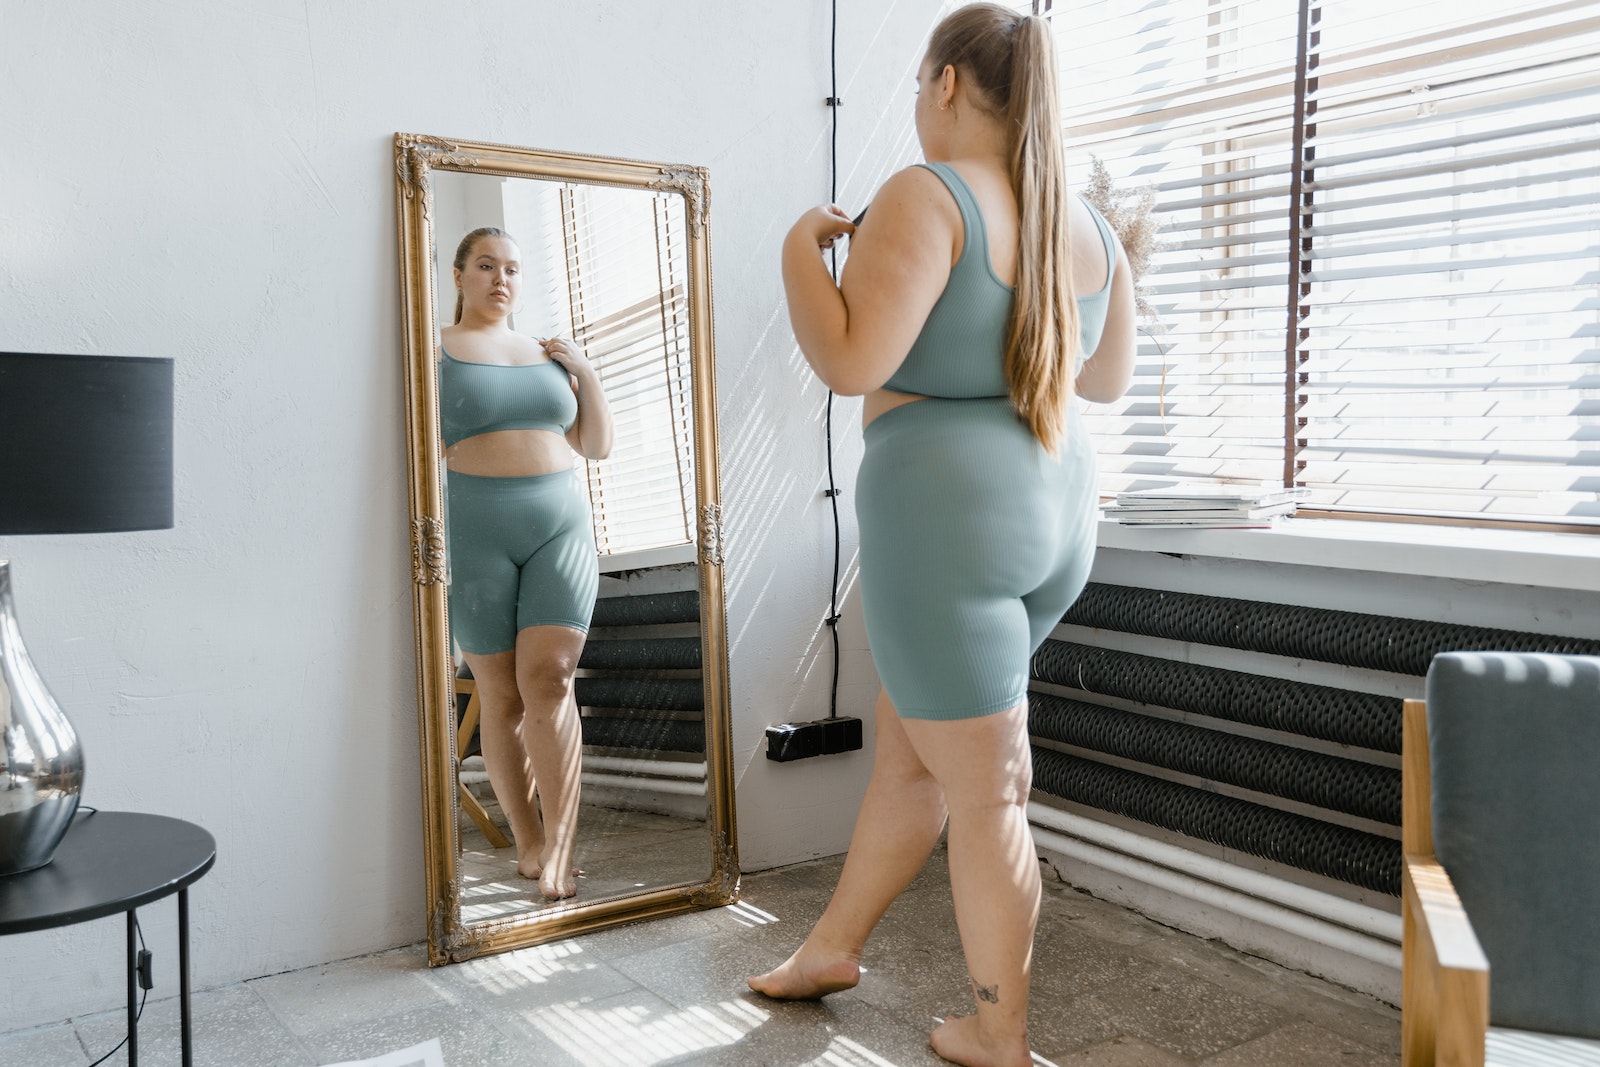 Mindfulness and Body Image understanding